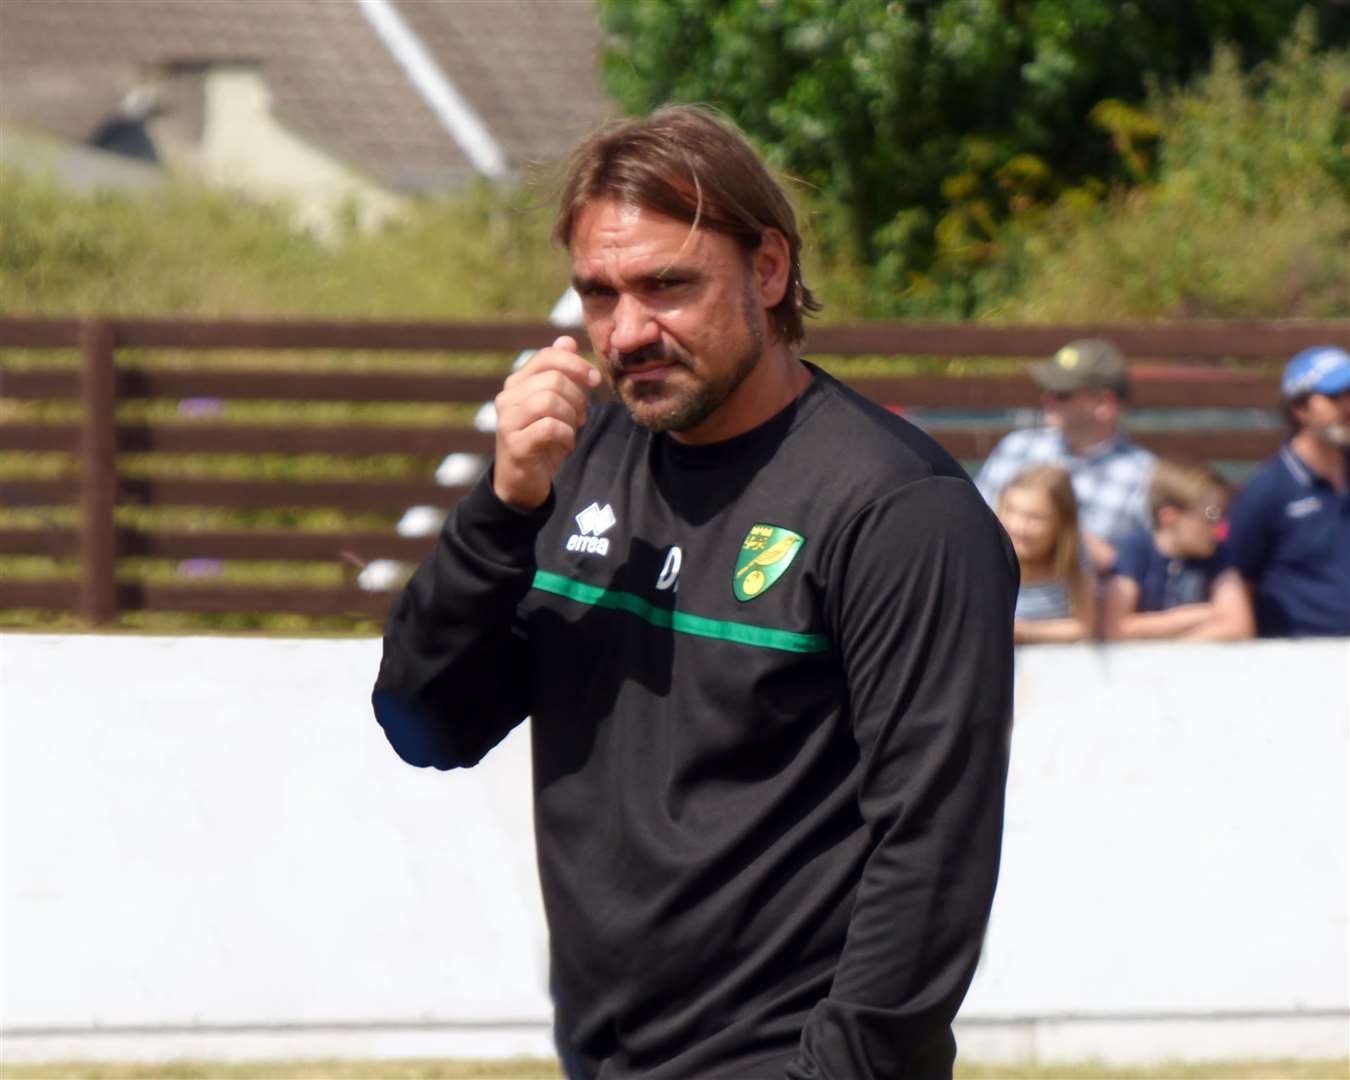 Norwich manager Daniel Farke appears to have convinced Sam to sign for his side